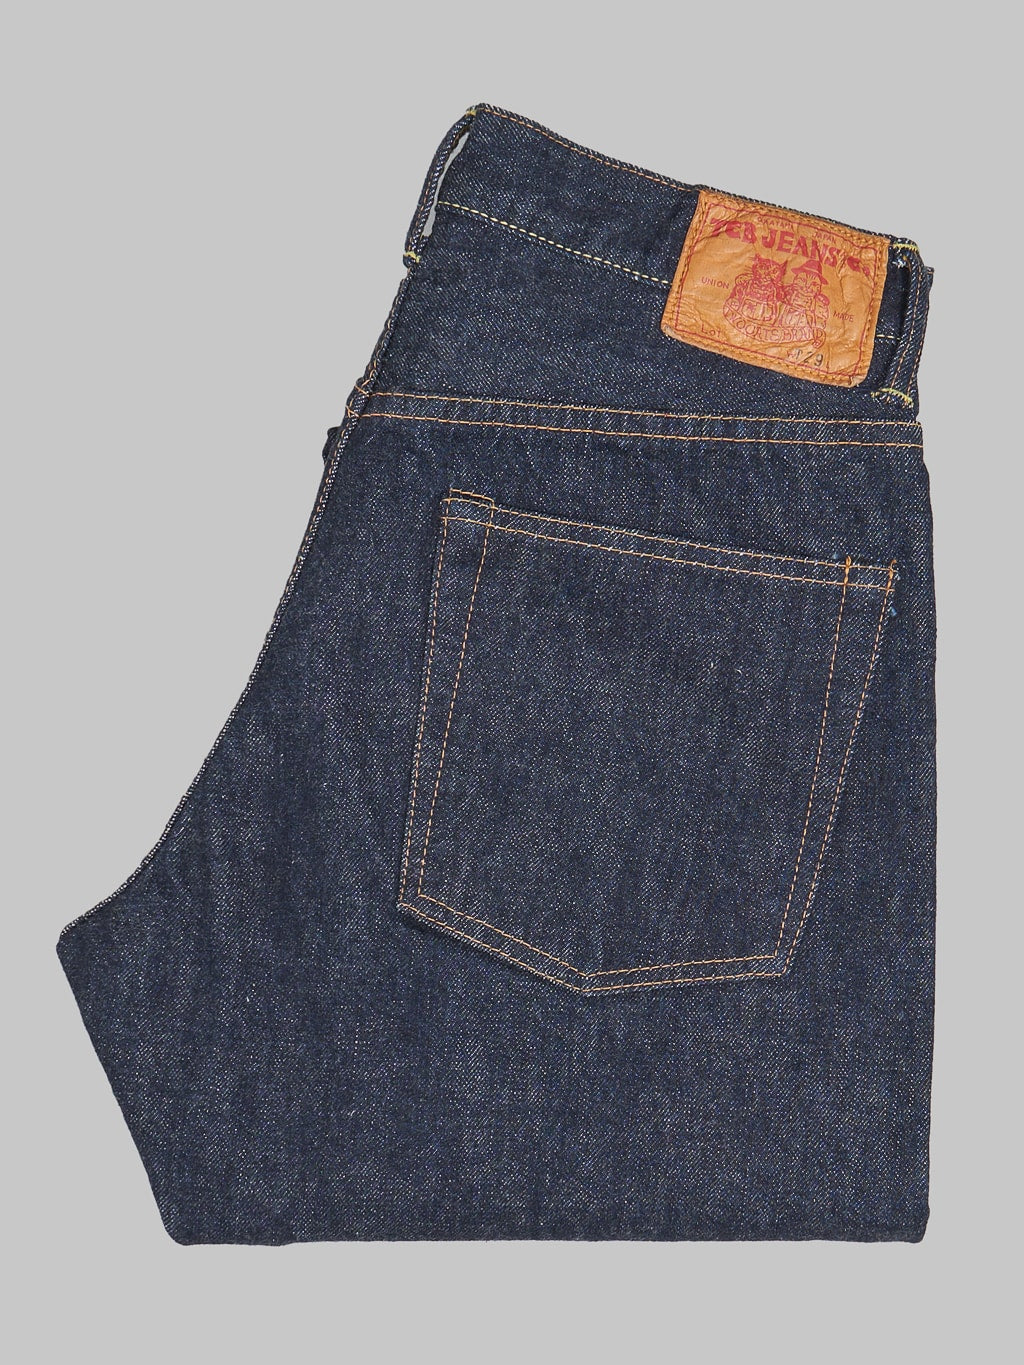 tcb 50s slim jeans t one wash made in japan